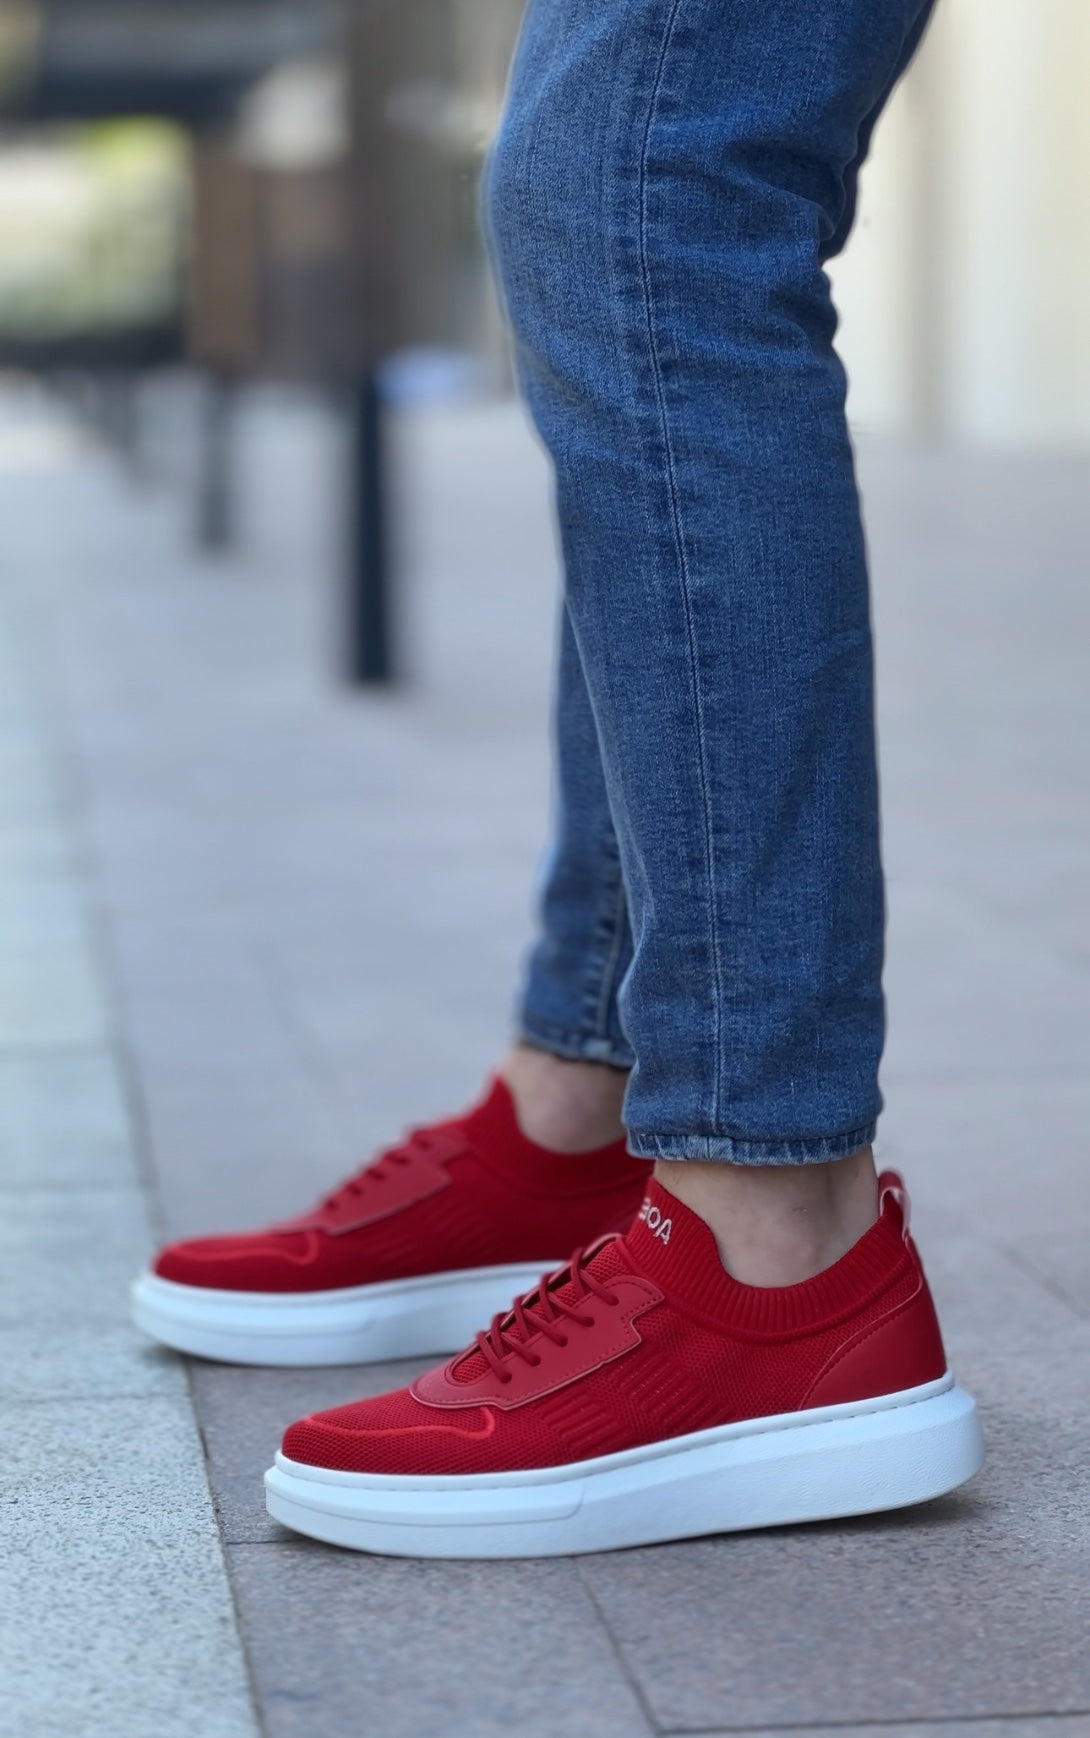 BA0812 Special Knitted Knitwear Style Red White Color Sports Shoes - STREETMODE™